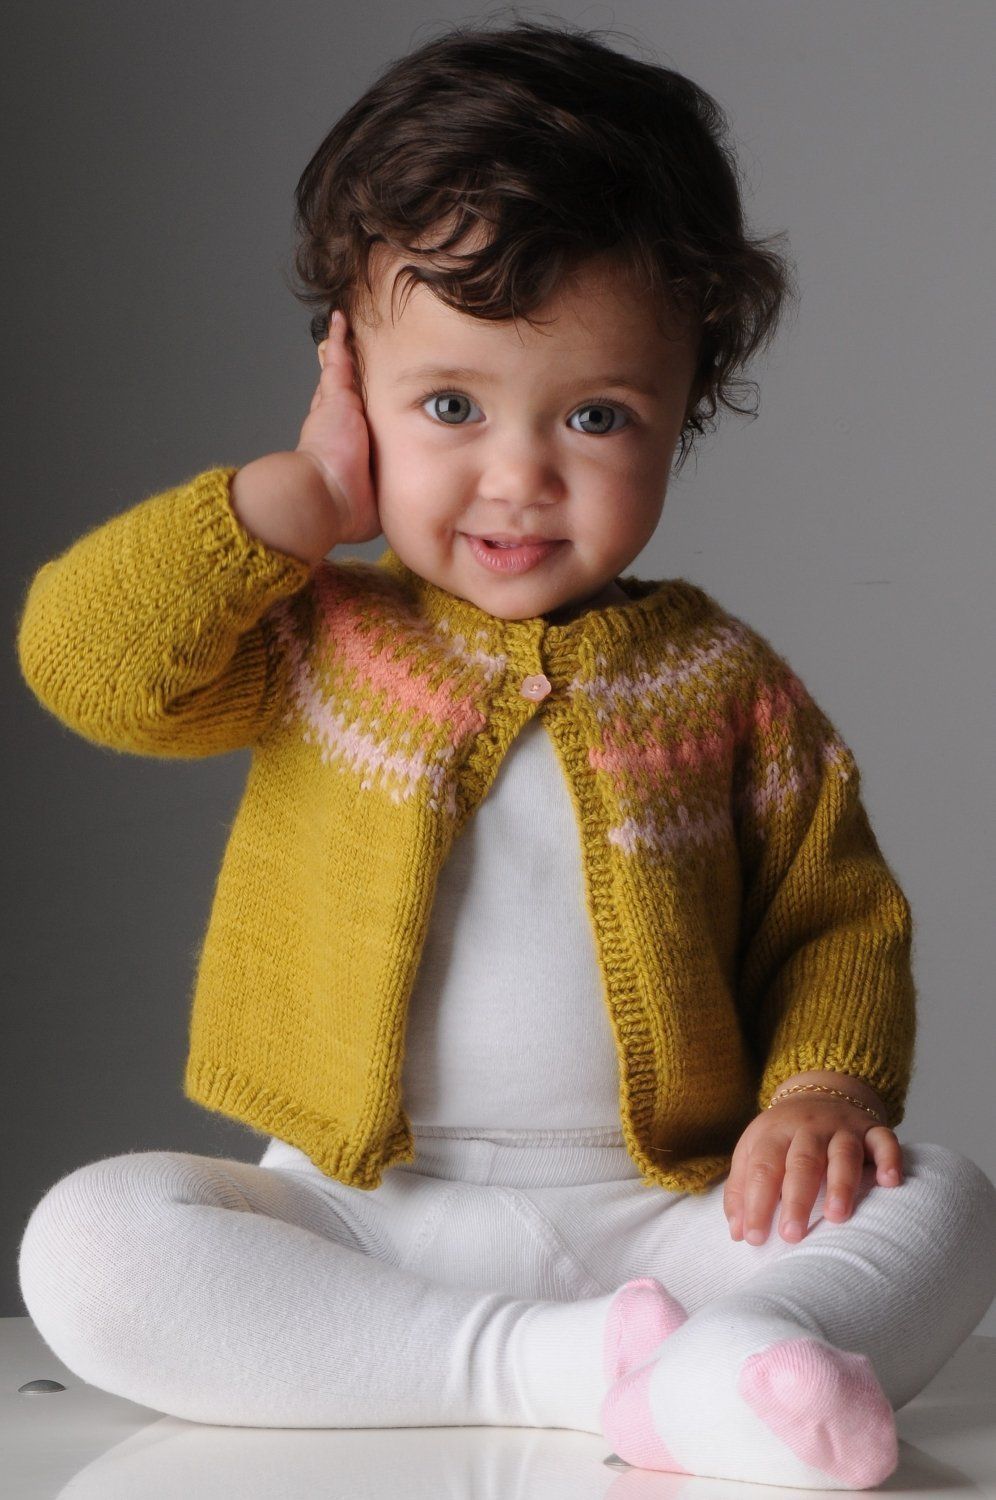 Tilly Cardigan Kit by Mrs Moon Mrs Moon